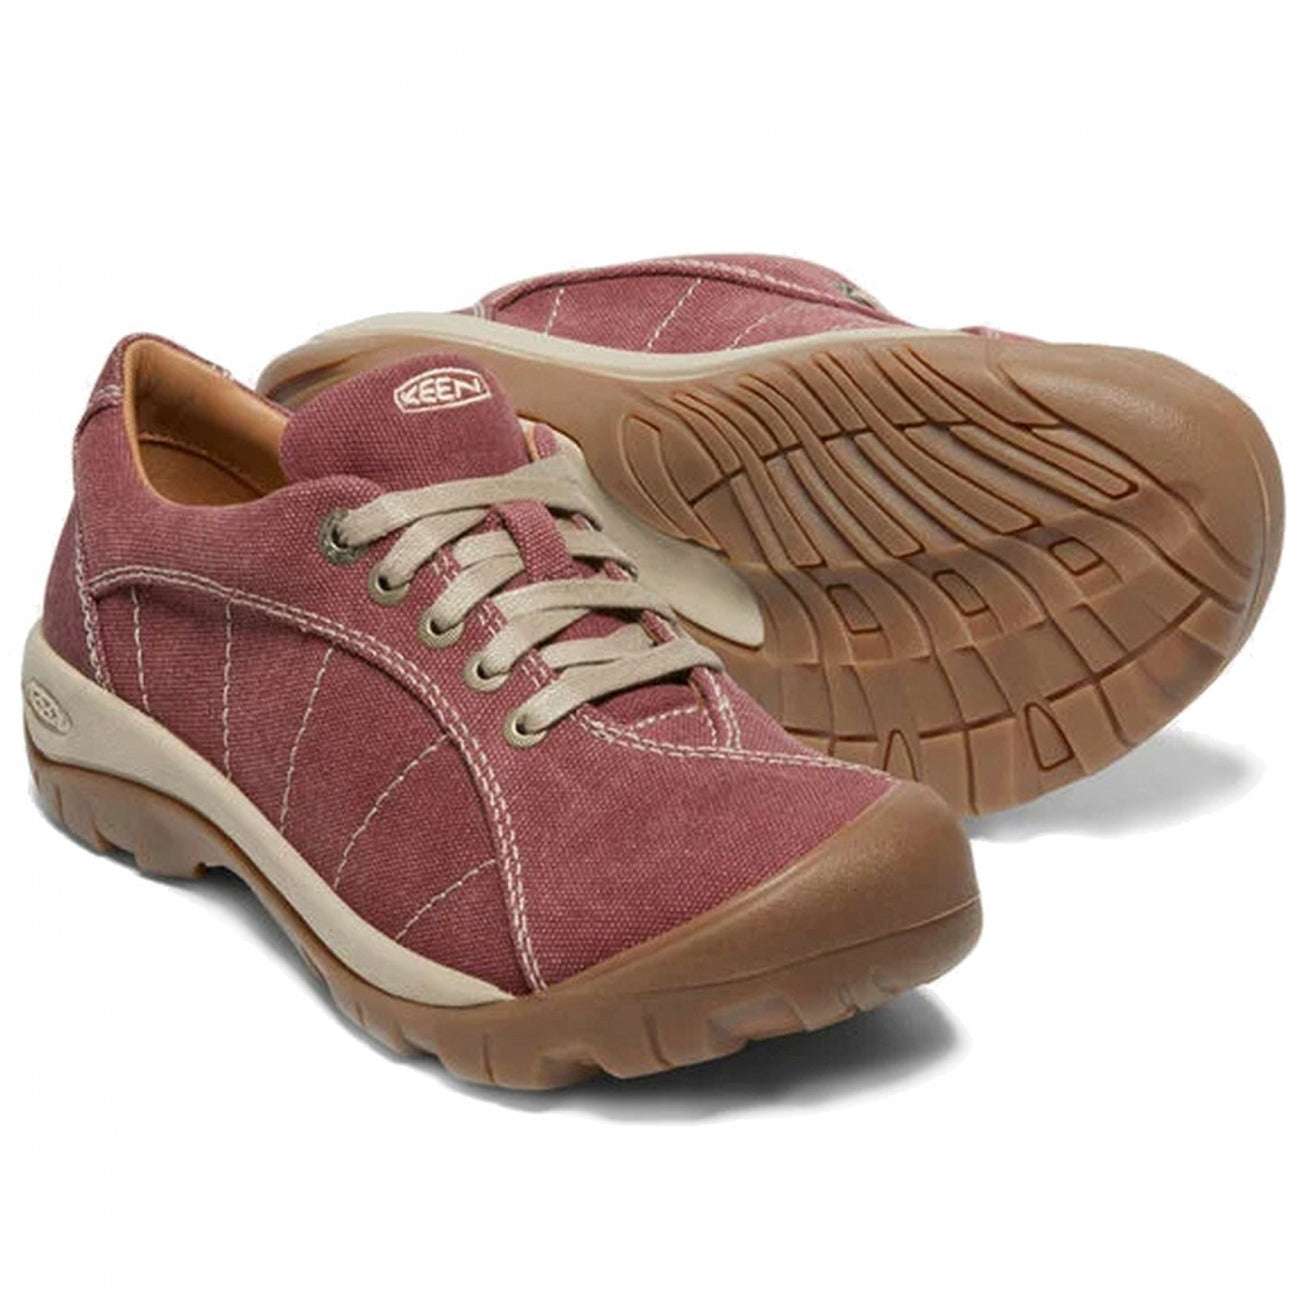 Keen, Presidio Canvas, Womens, Red Plaza Taupe Shoes Keen Red Plaza Taupe 10 